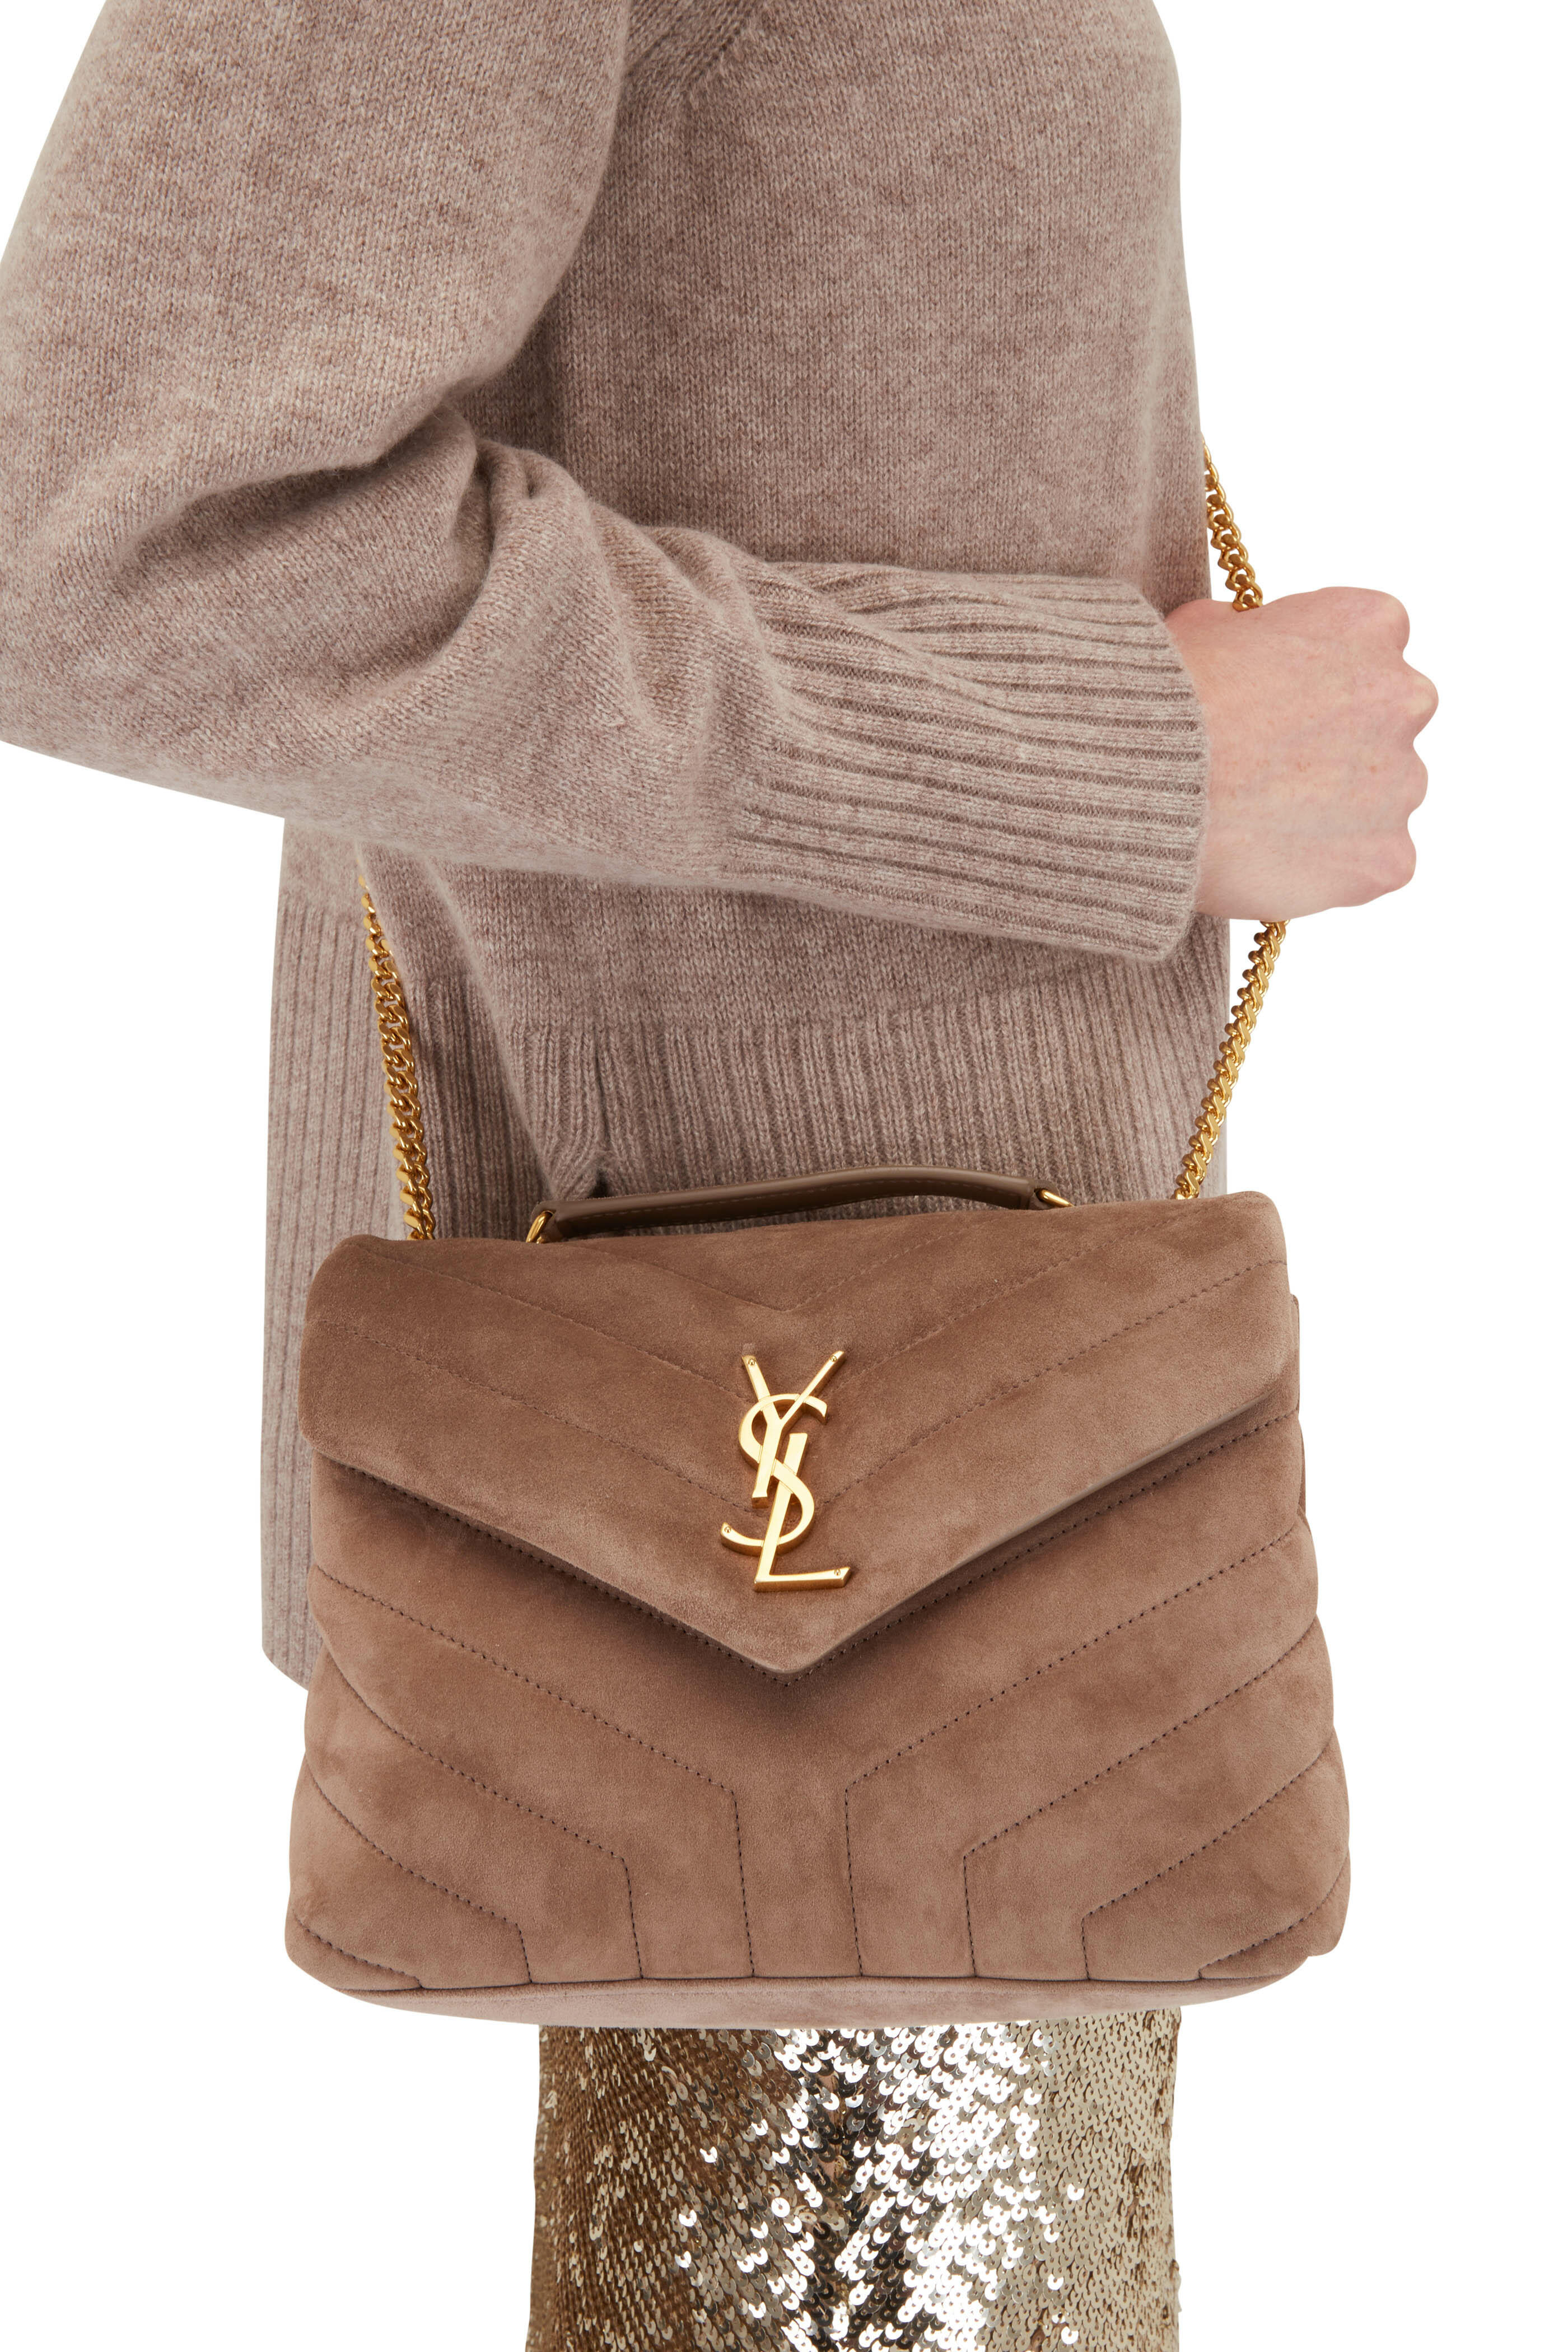 How To Style YSL Toy Loulou in 2023  City outfits, Taupe outfit, Beige bag  outfit